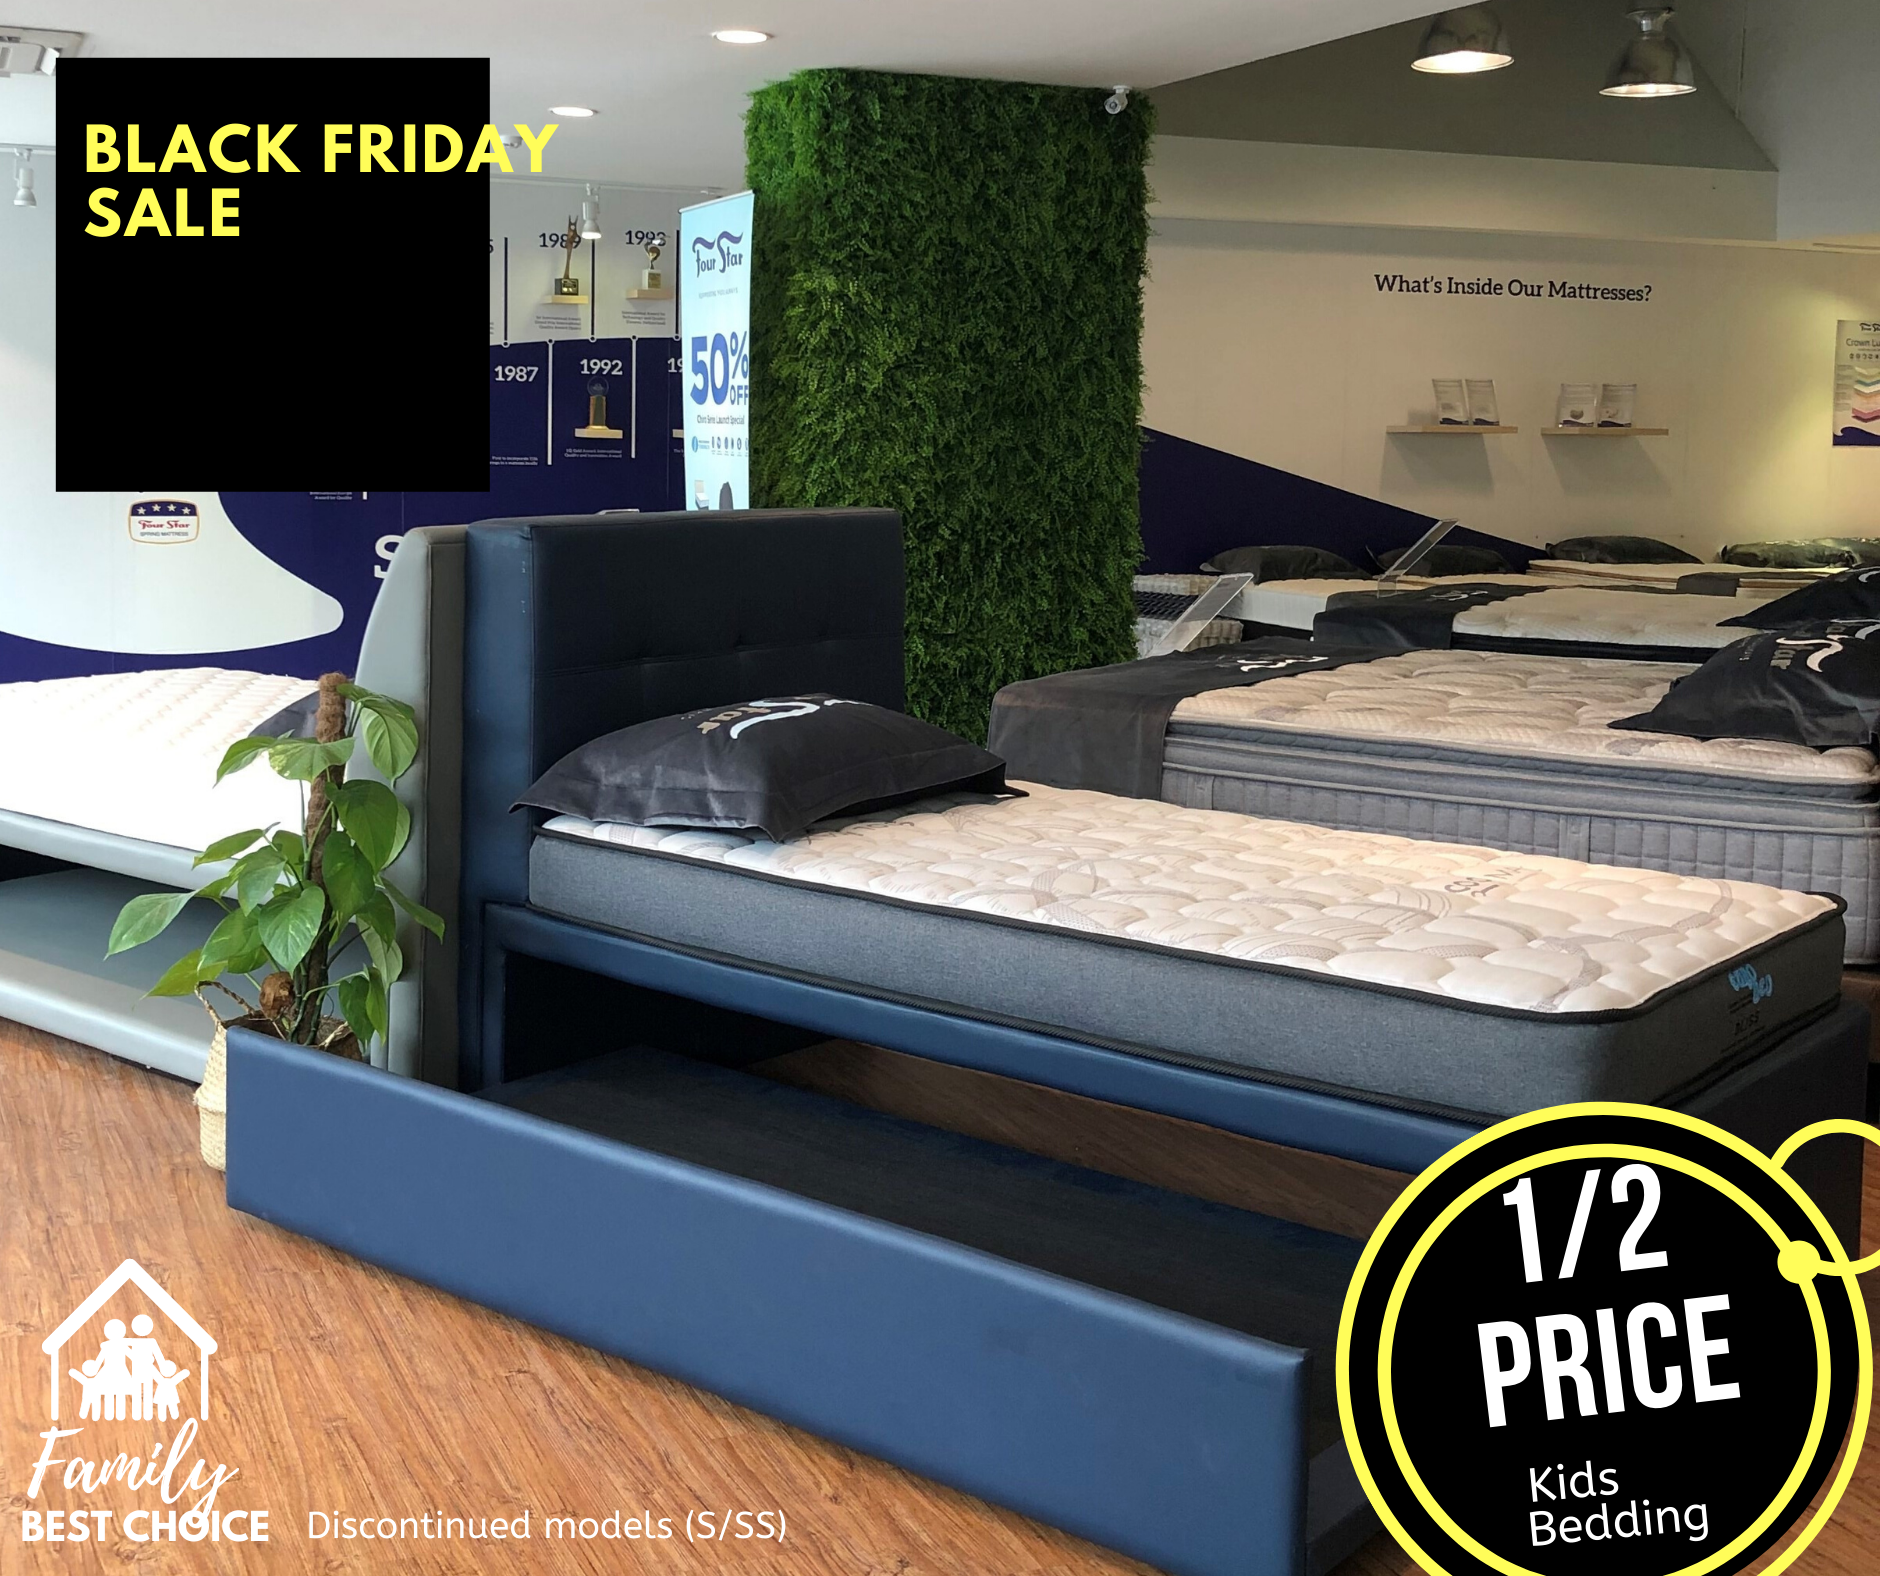 2 DAYS ONLY! 16 – 17 NOV Four Star Mattress Gallery is having Pre BLACK FRIDAY SALE with its largest discount this year! - 3